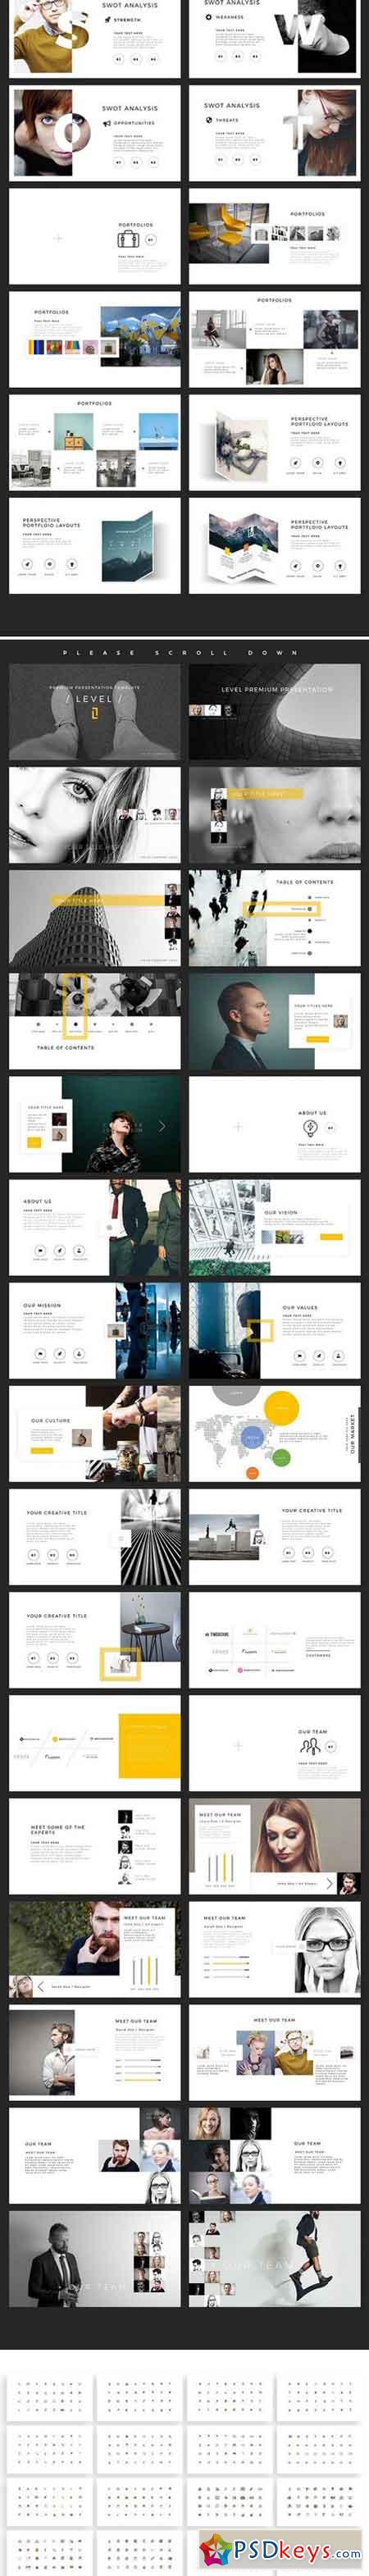 LEVEL PowerPoint Template 2004141